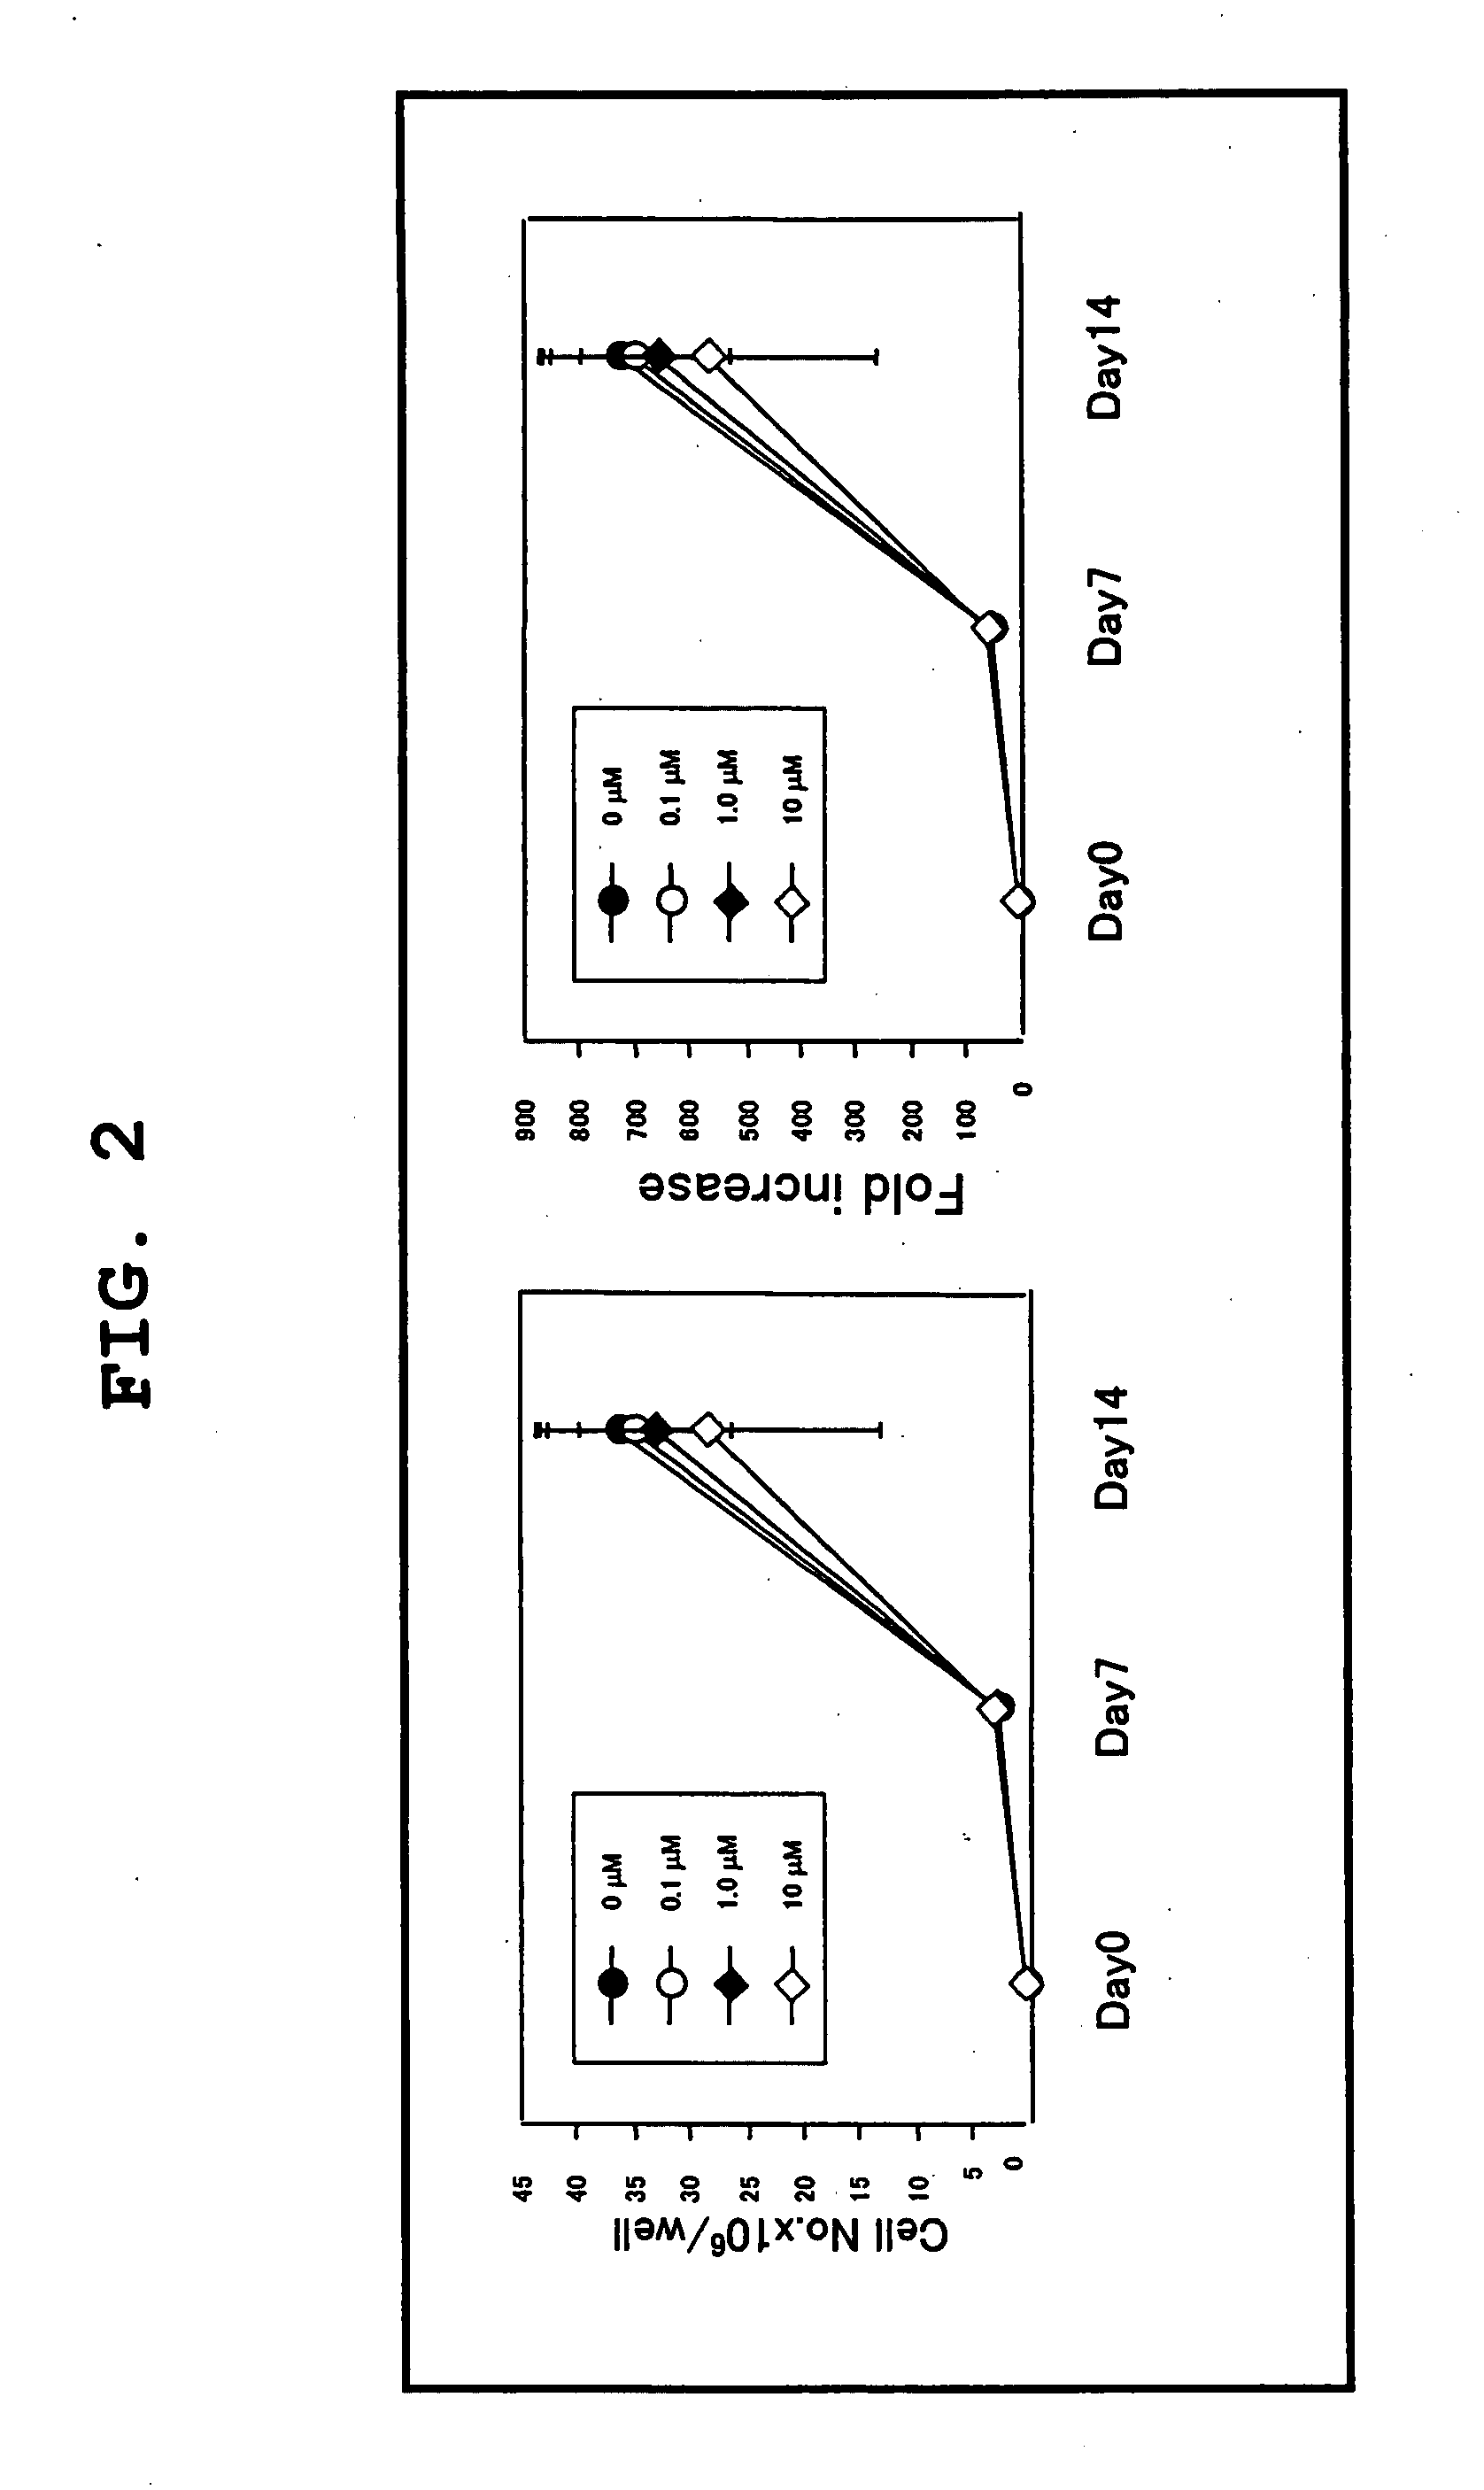 Method for Amplification of Endothelial Progenitor Cell in Vitro